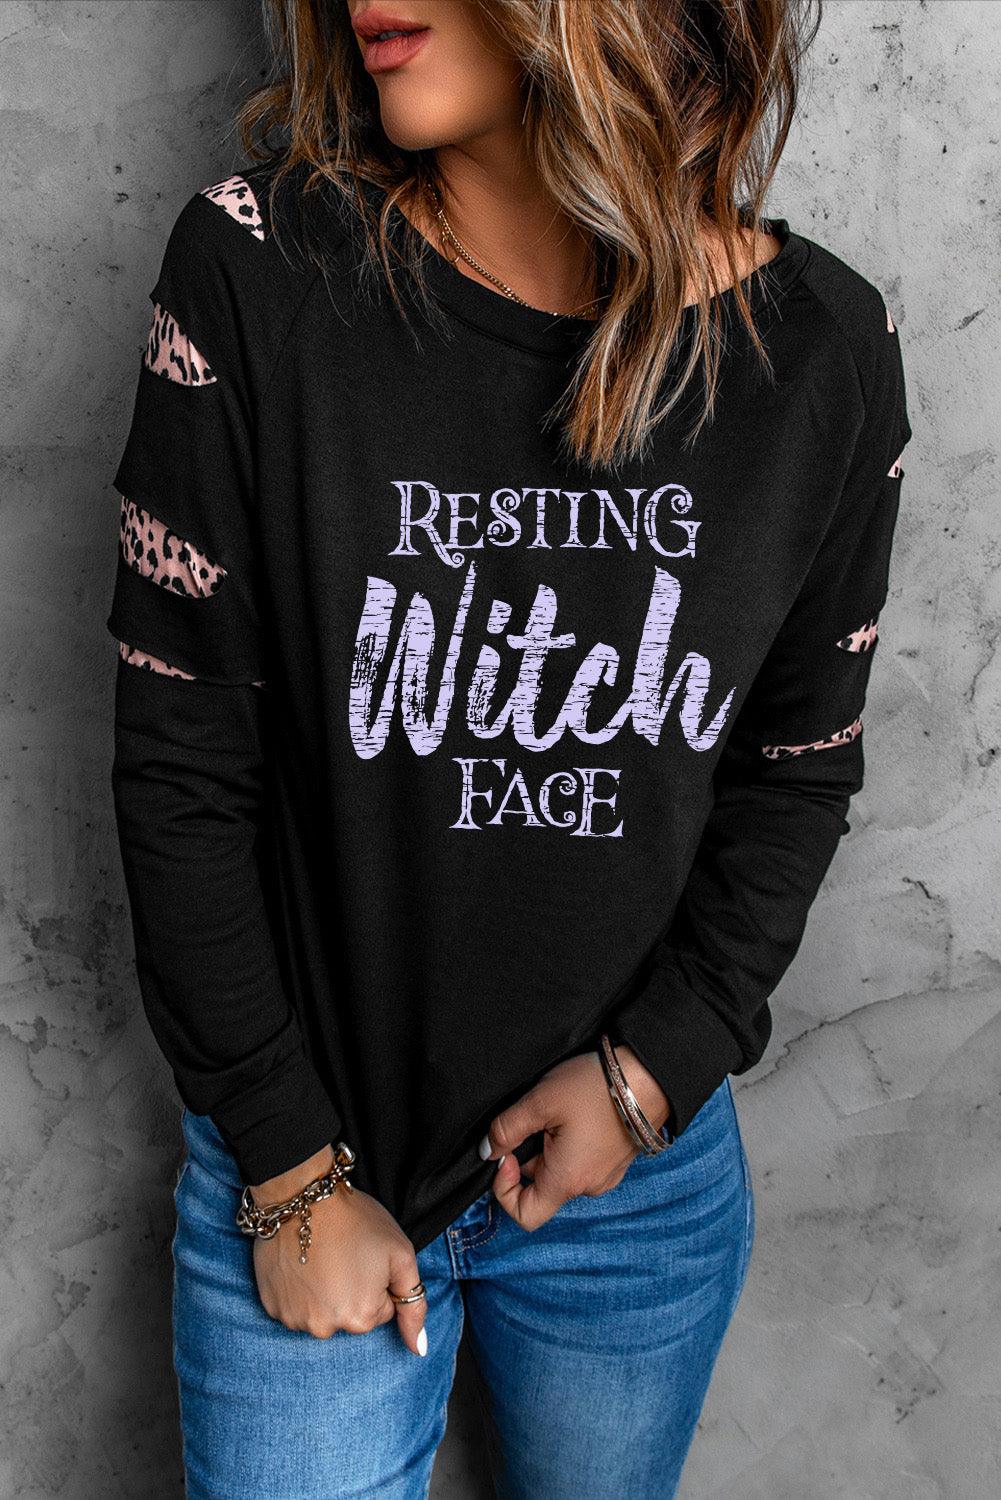 RESTING WITCH FACE Graphic Sweatshirt - Lab Fashion, Home & Health